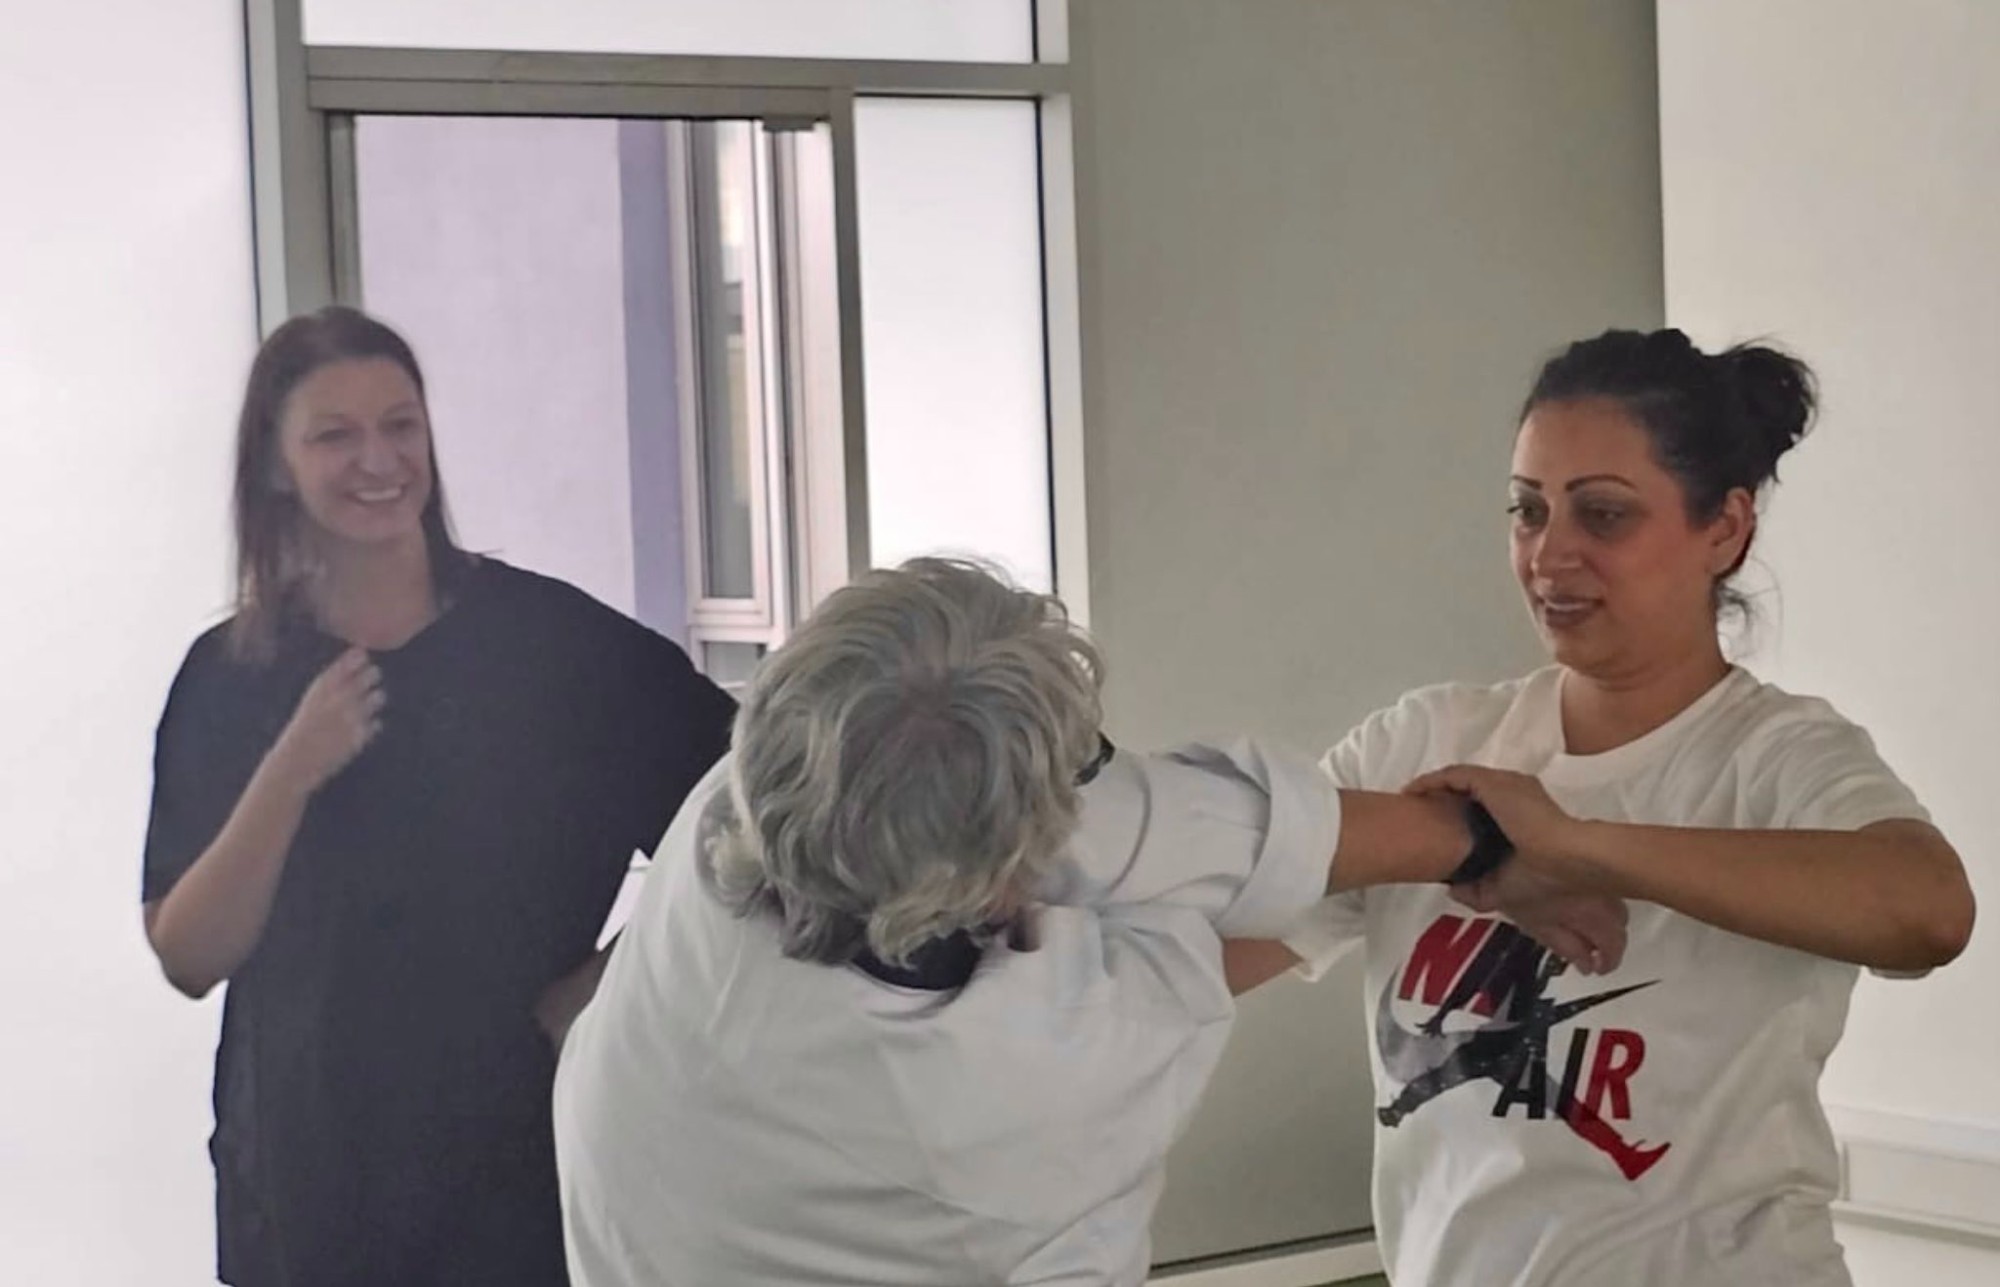 Lynn teaching a self-defence move to a lady as another looks on.jpg